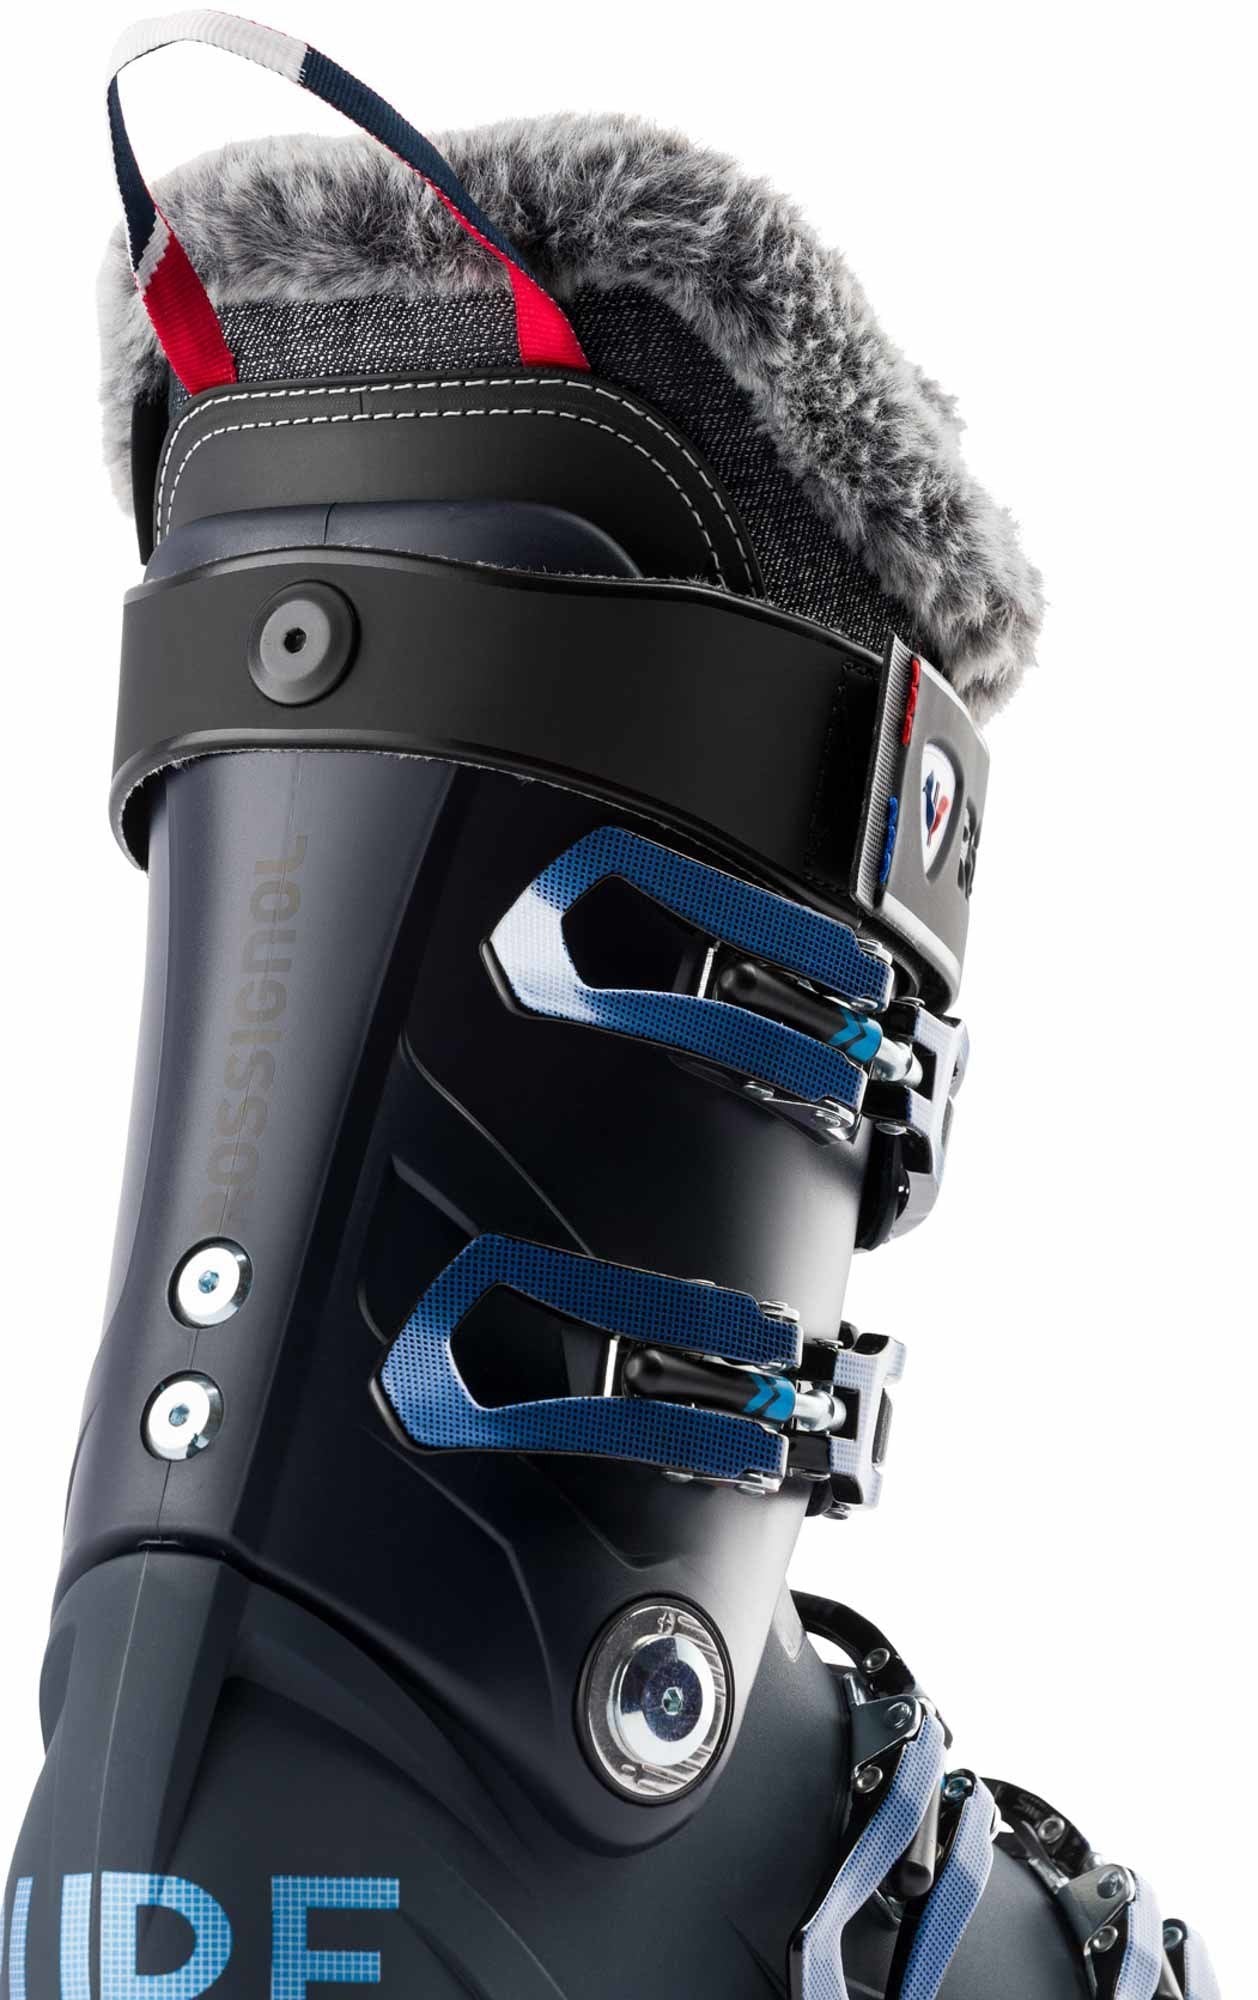 Rossignol Pure 70 Ski Boots-ROSSIGNOL-Sports Replay - Sports Excellence